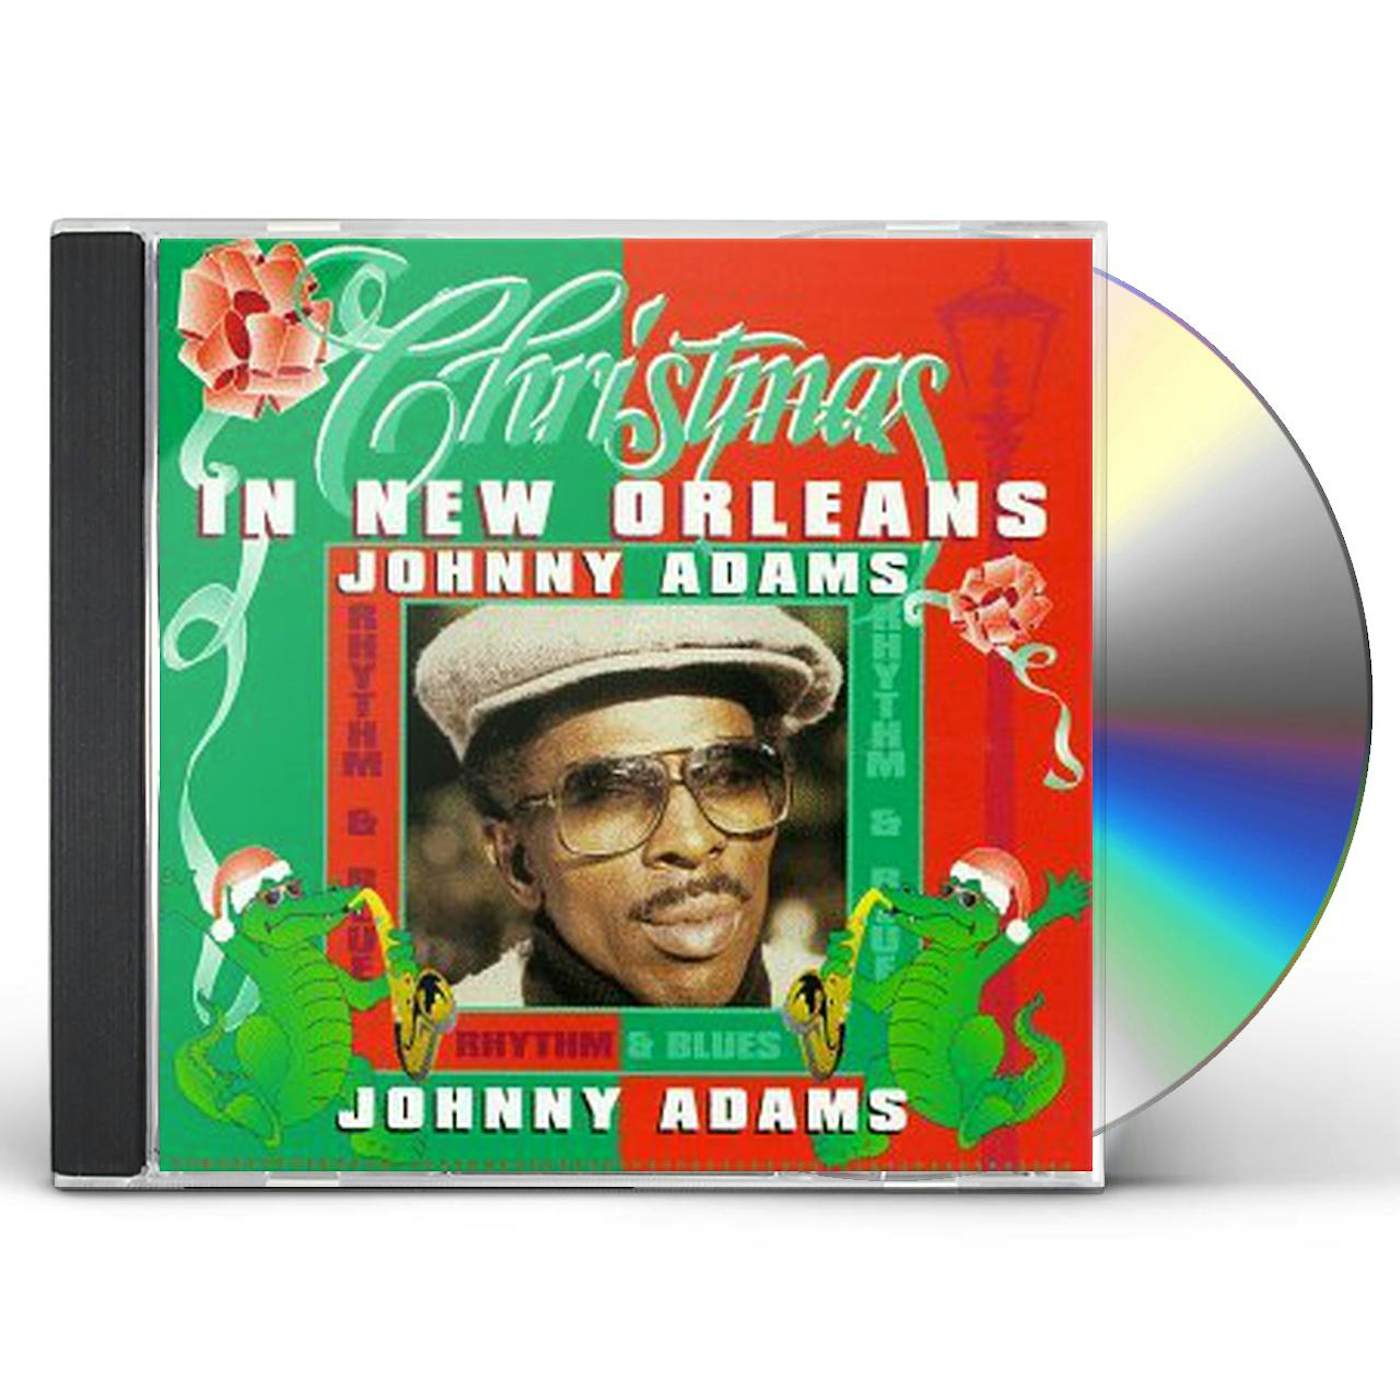 Johnny Adams CHRISTMAS IN NEW ORLEANS CD